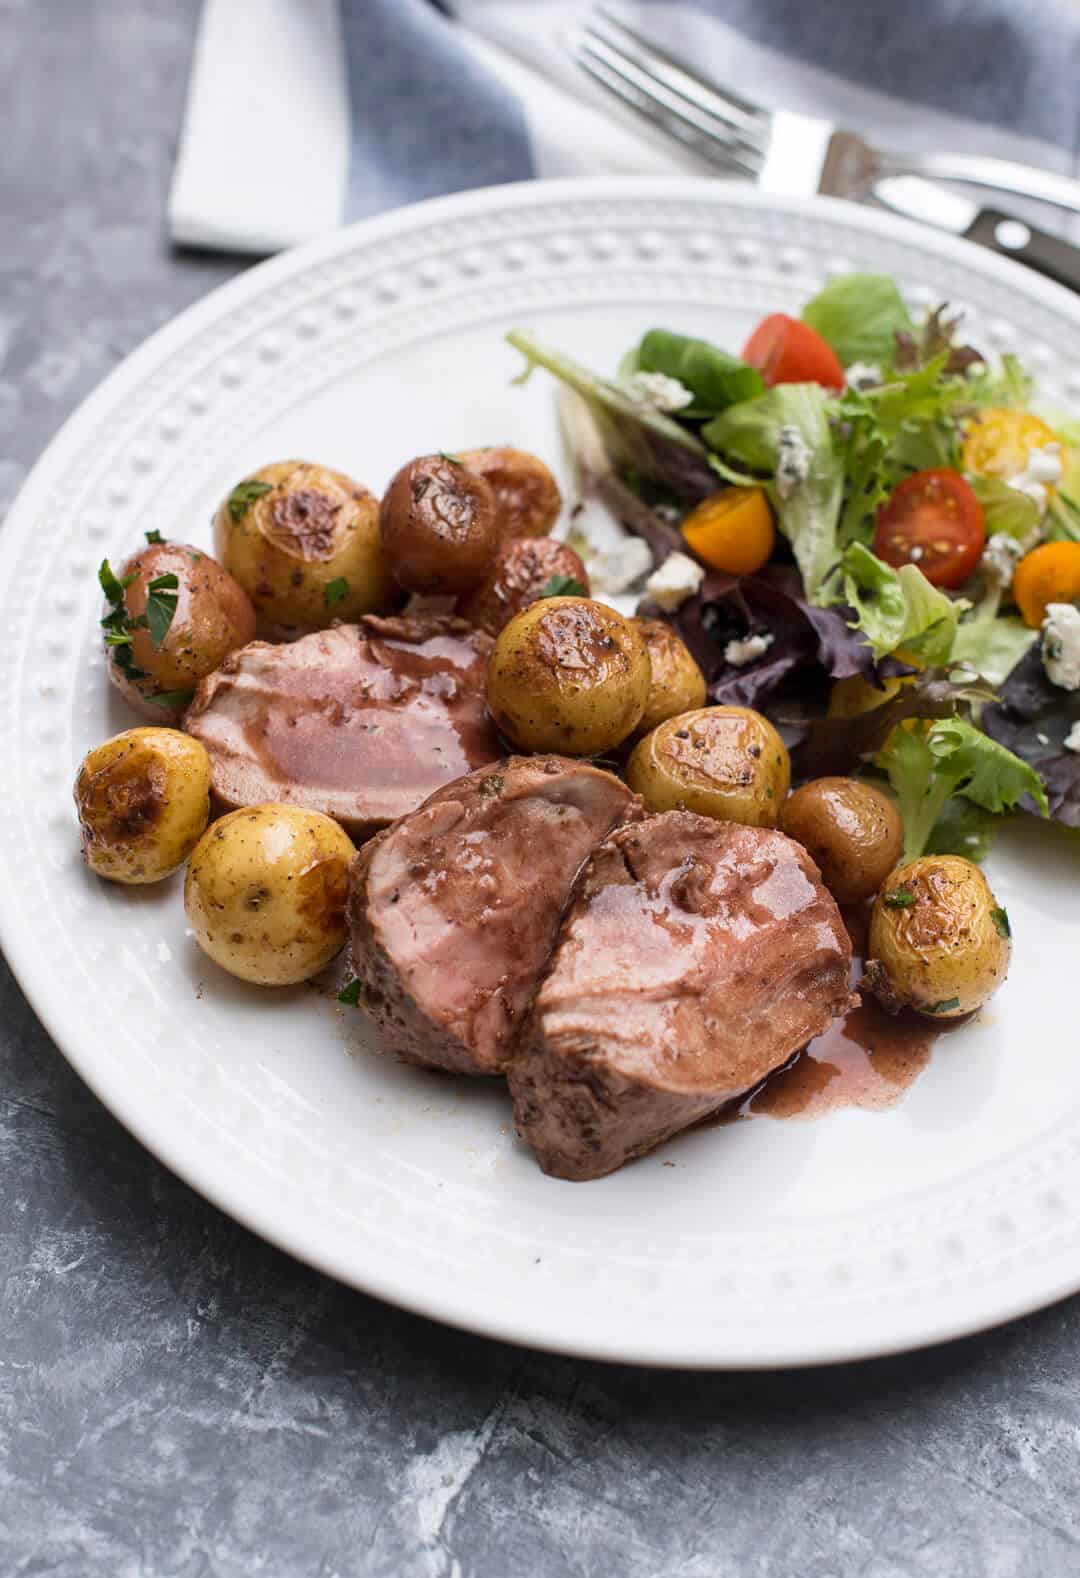 A white plate with three slices of the pork tenderloin with potatoes and a green salad.